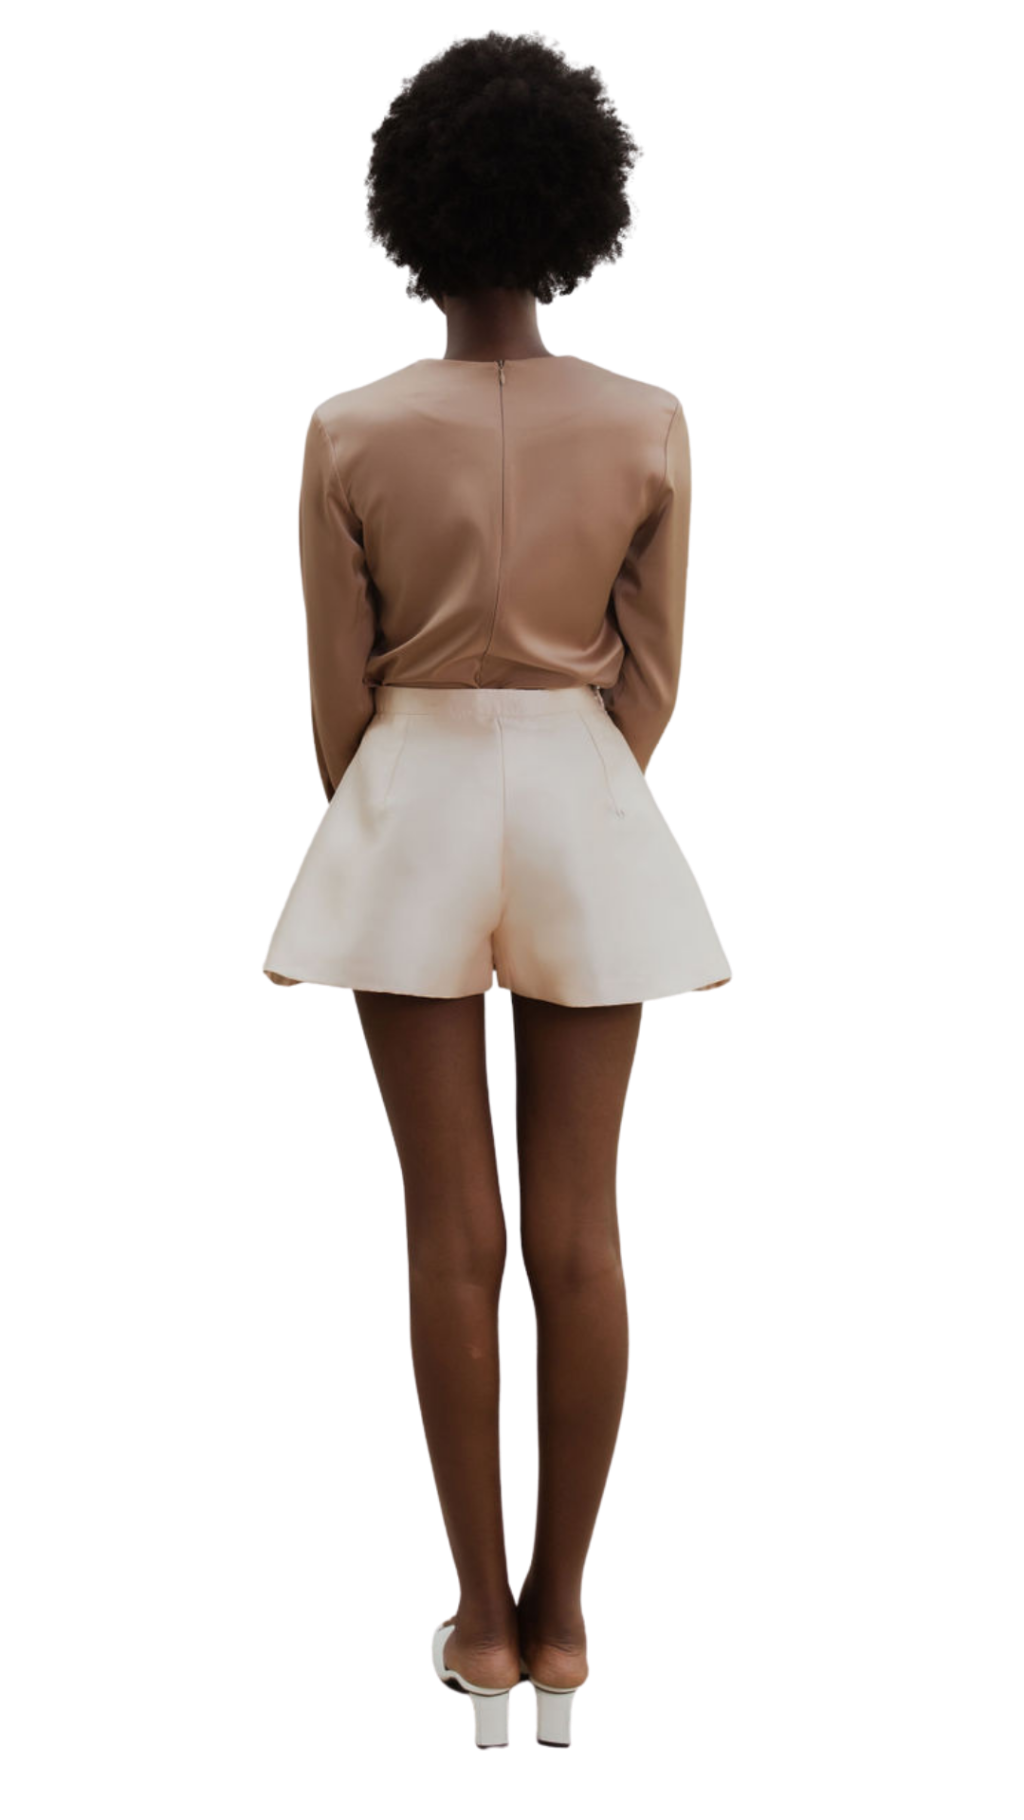 The back of a model wearing a brown top and Nude colored shorts